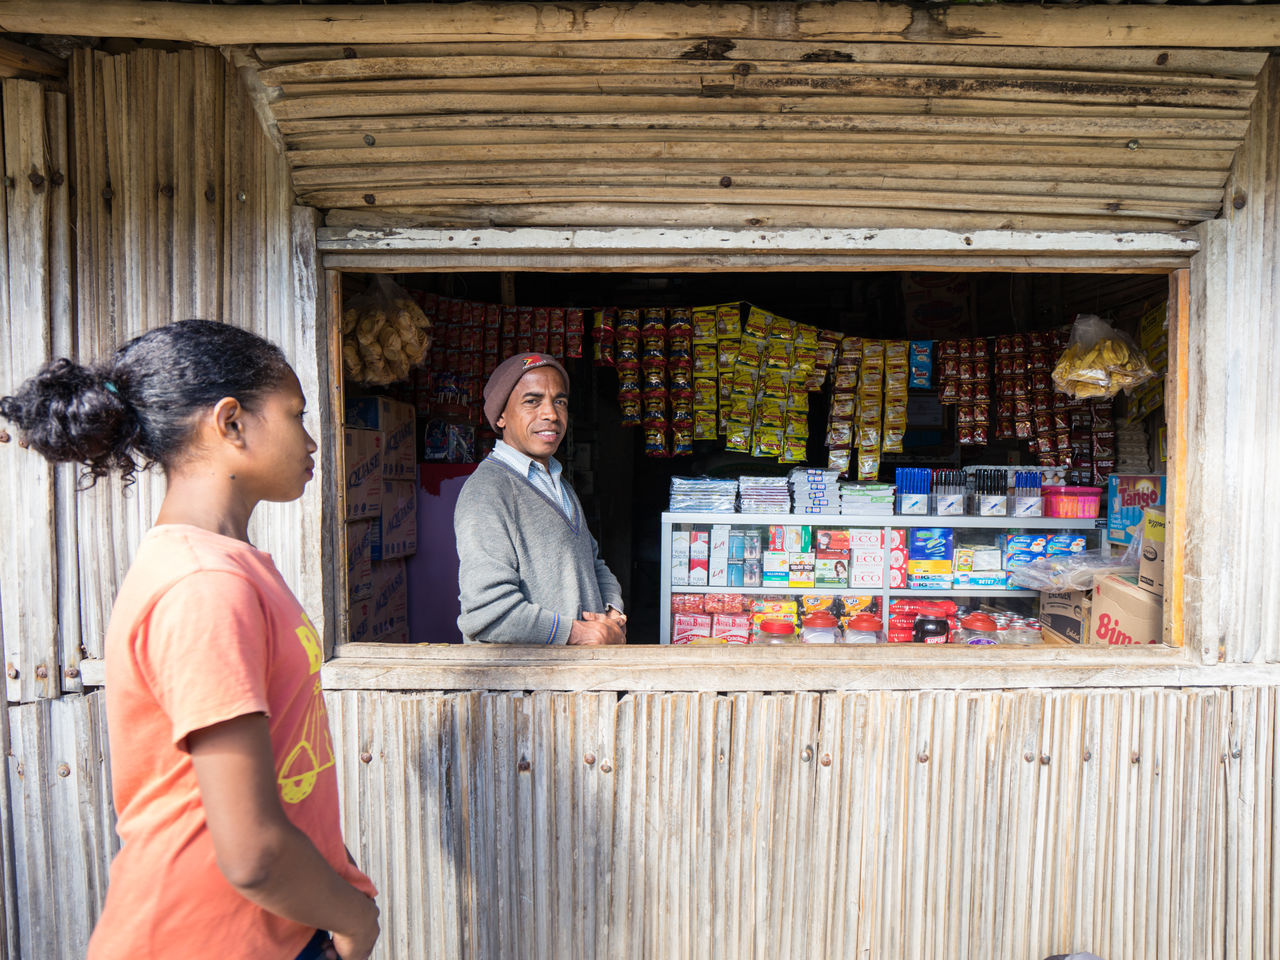 Maubisse, east timor - august 11, 2018: young ethnic female customer approaching to small local grocery store while smiling male vendor standing at counter and looking at camera